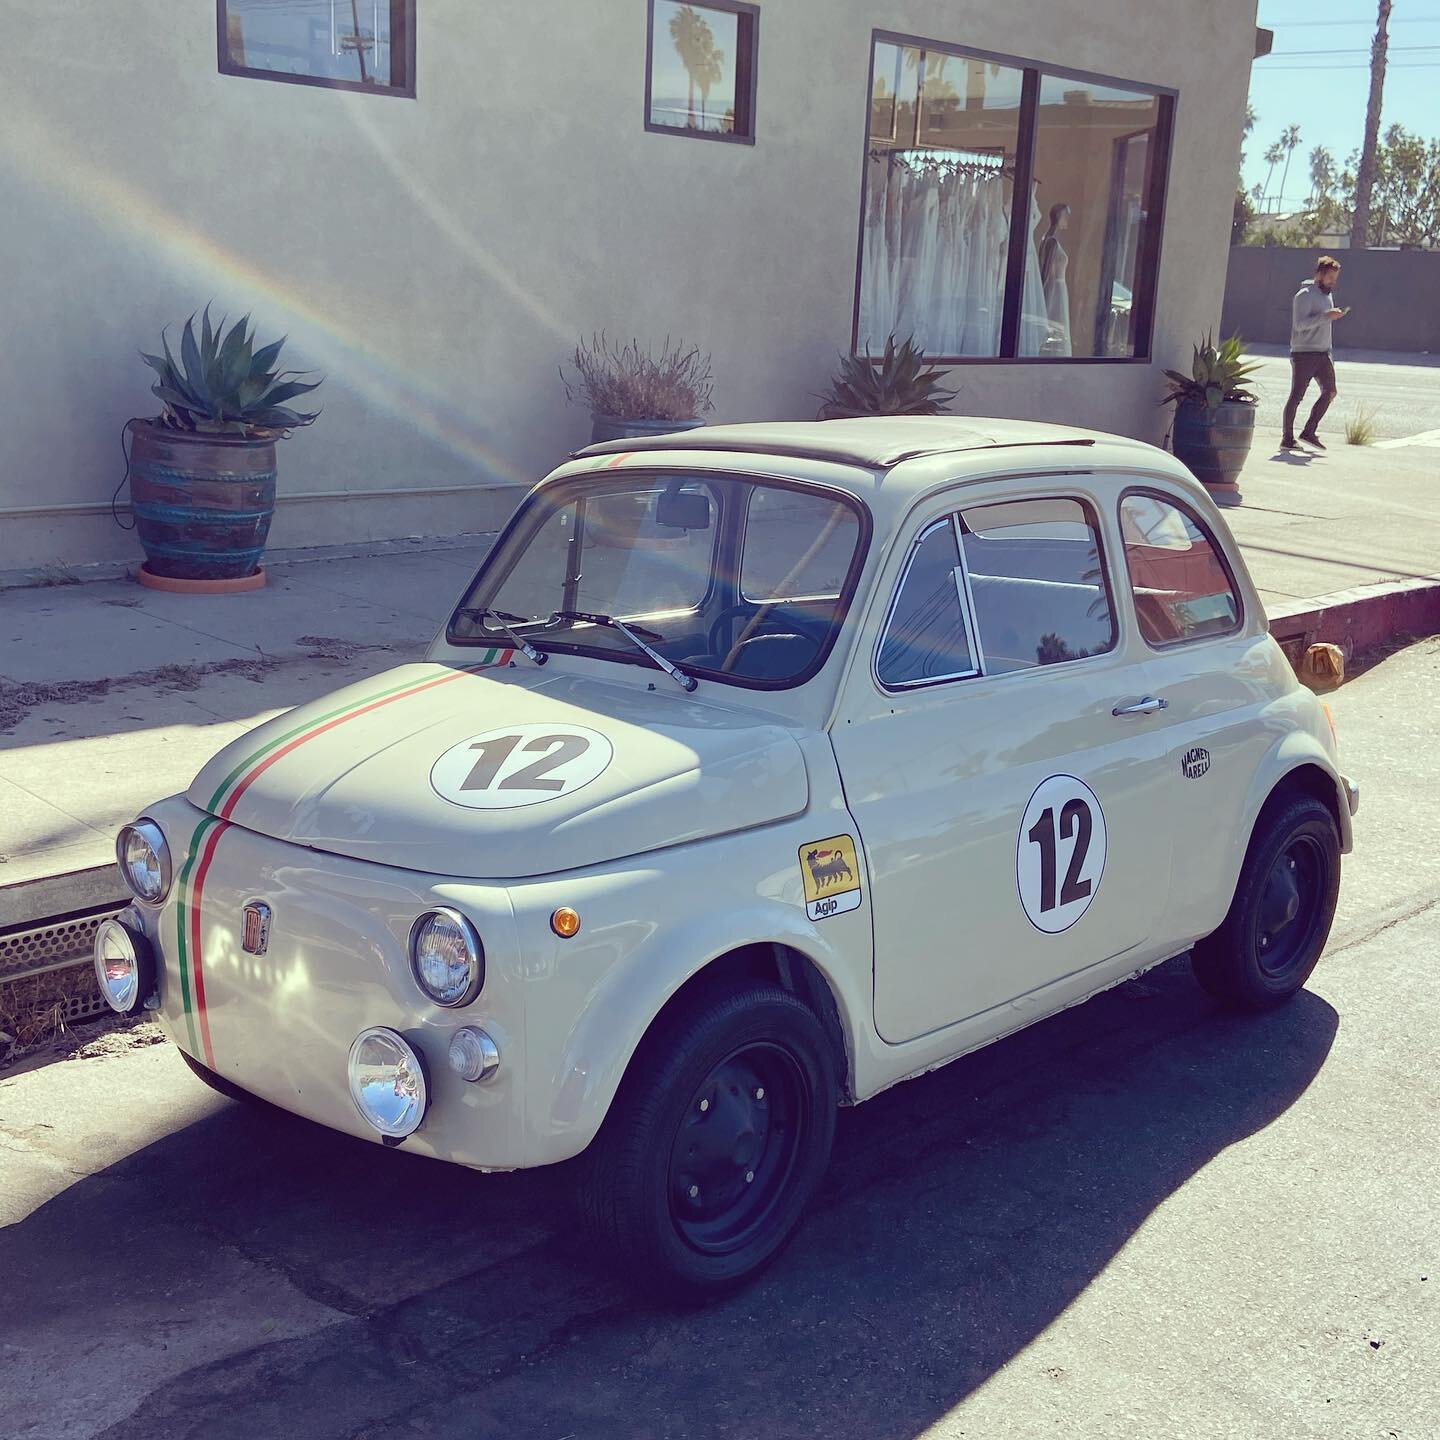 😍🇮🇹 🚙💨 small is beautiful #fiat #italy #car #classic #design